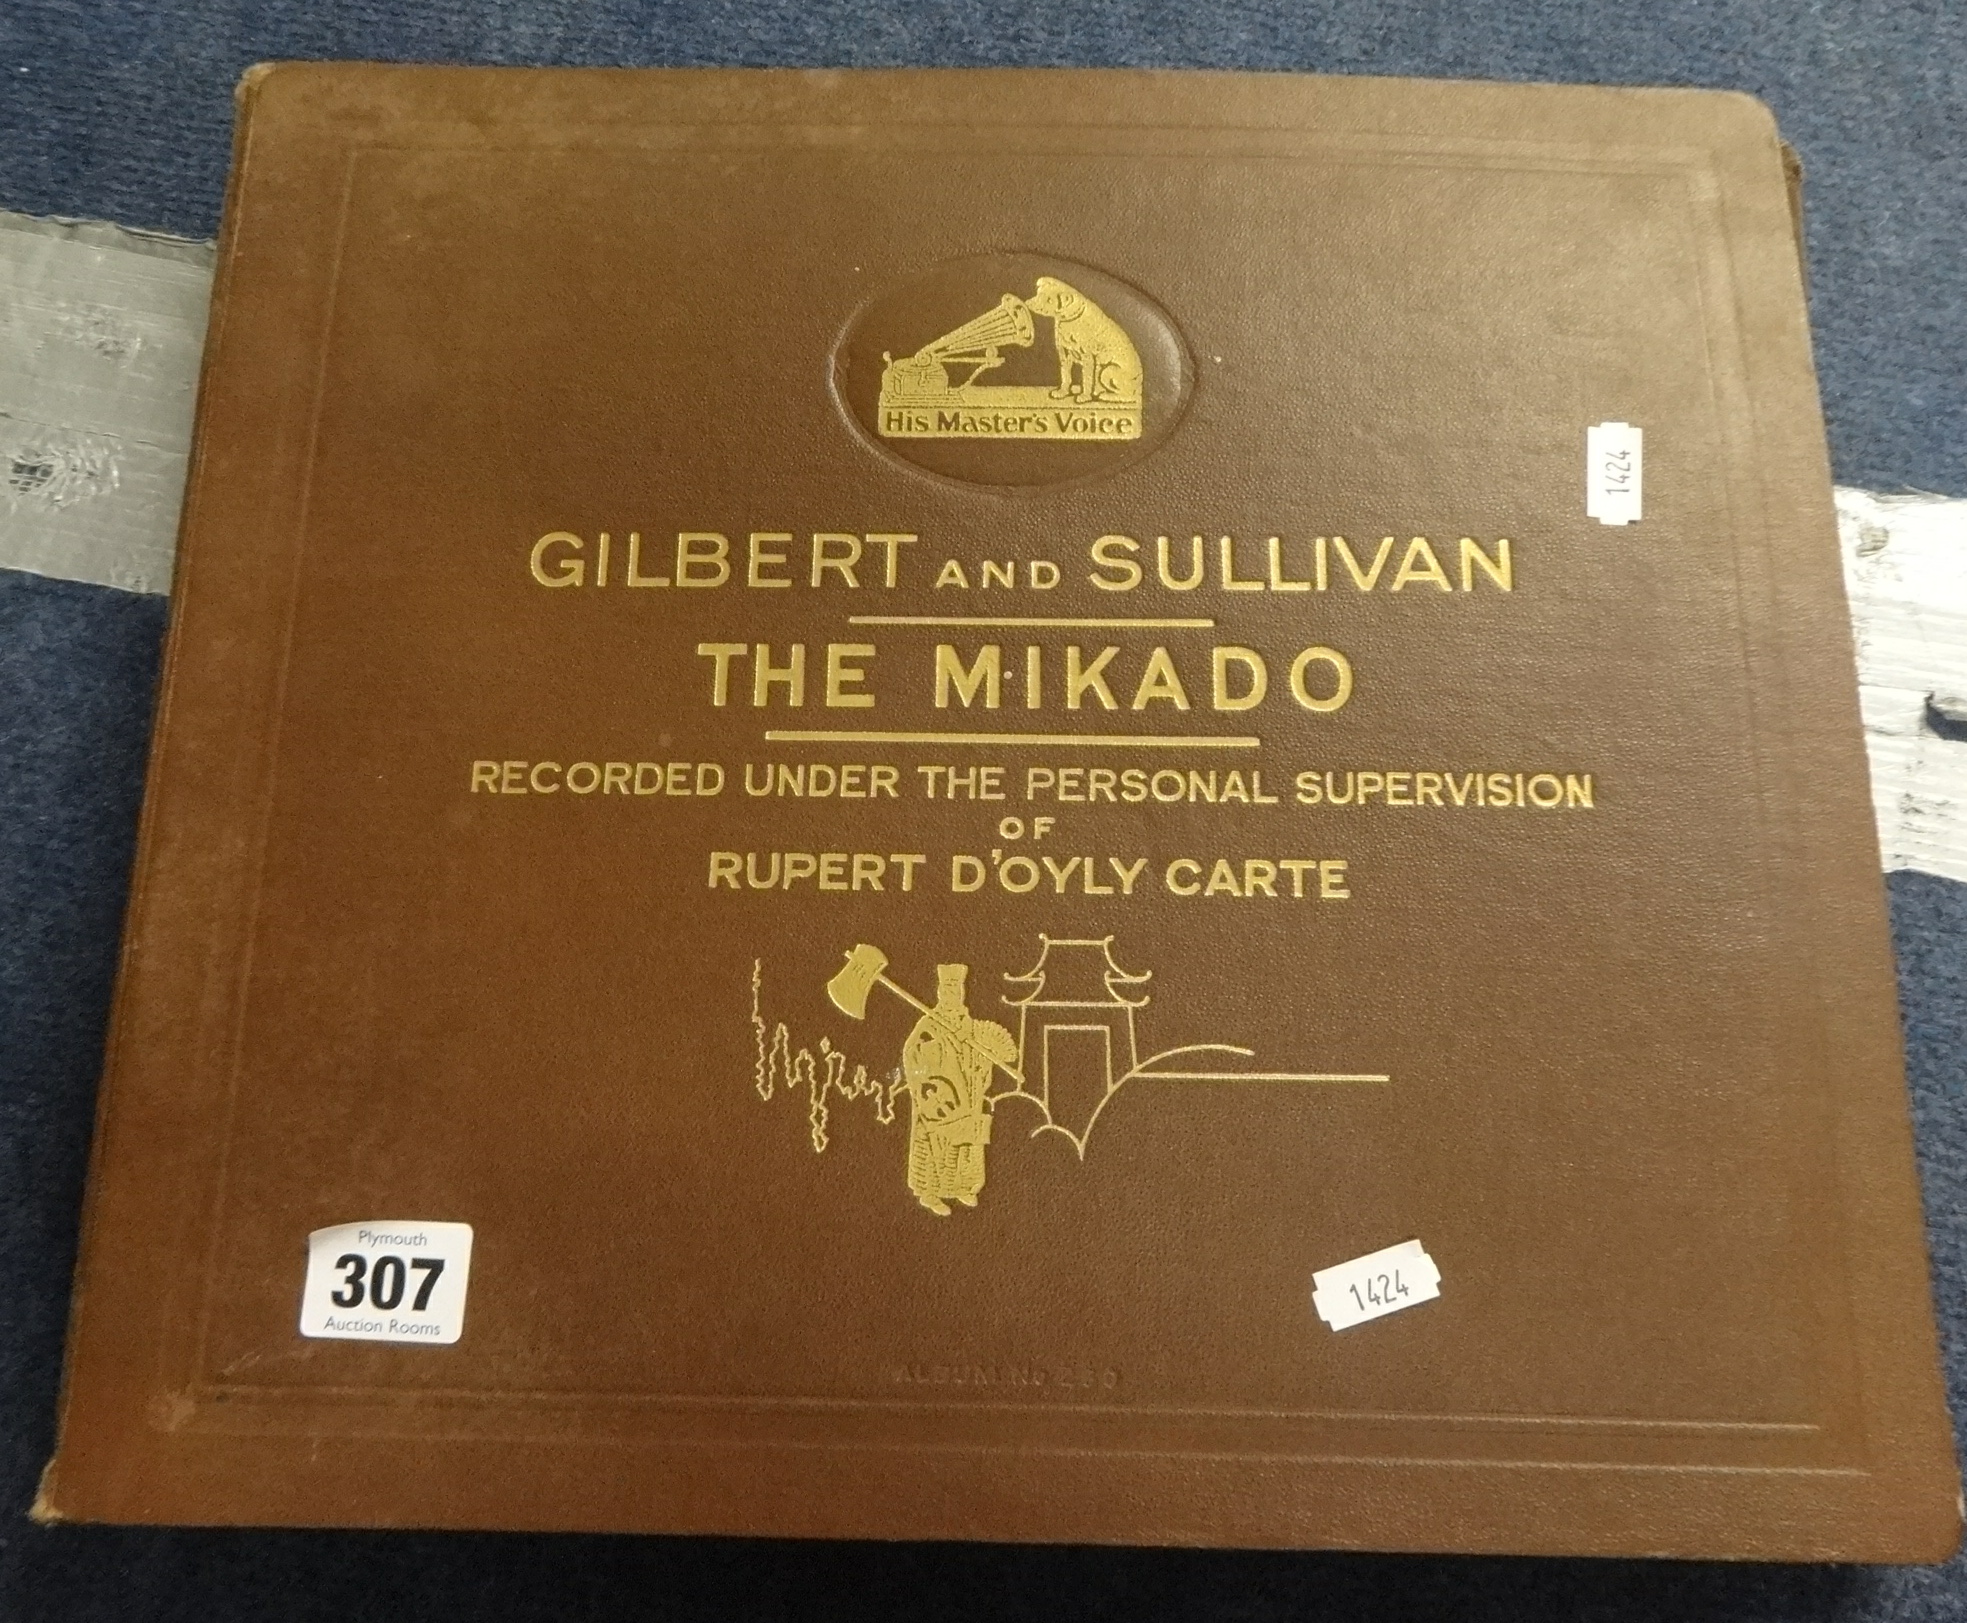 Gilbert and Sullivan, The Mikado 78 RPM record collection by HMV. - Image 2 of 4